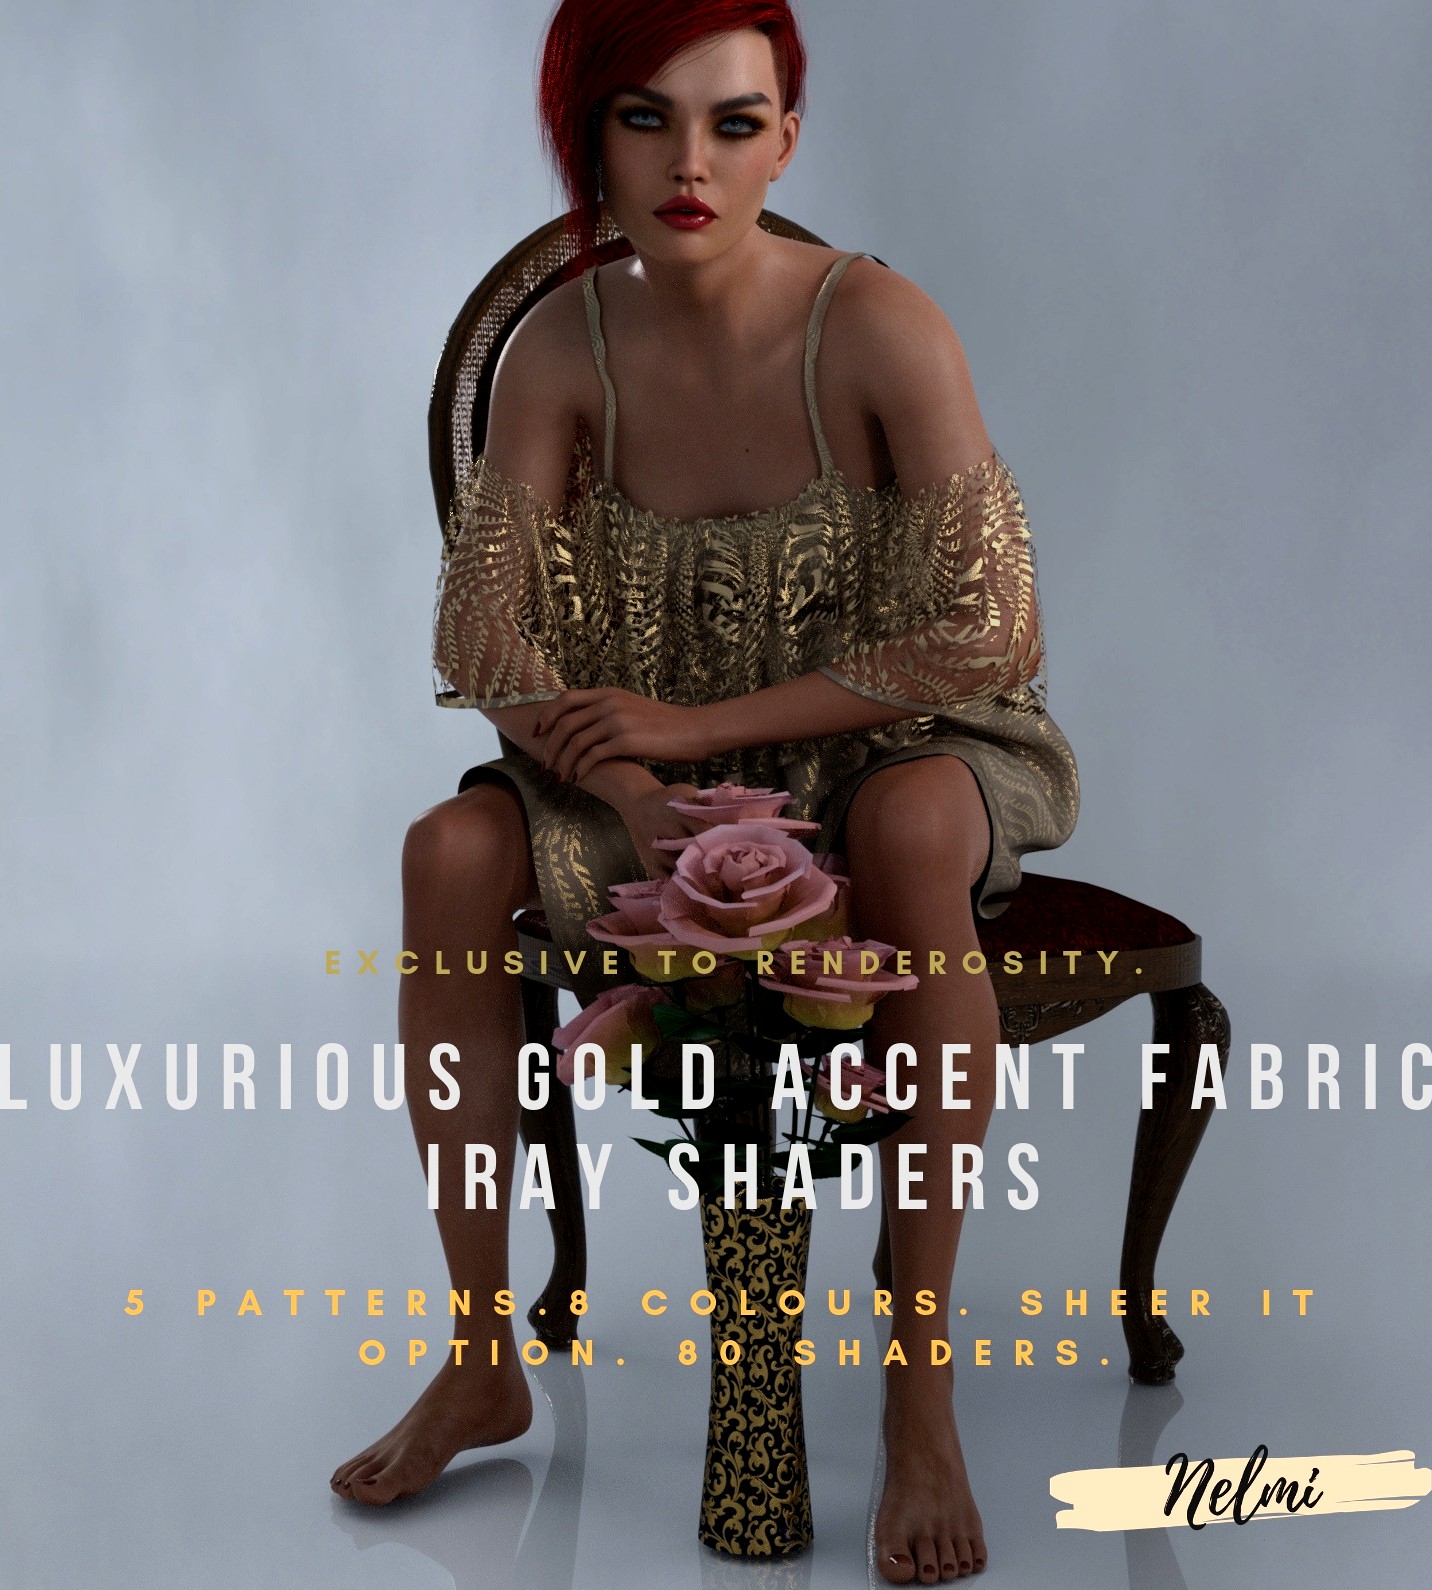 Luxurious Gold Accent Fabric Iray Shaders